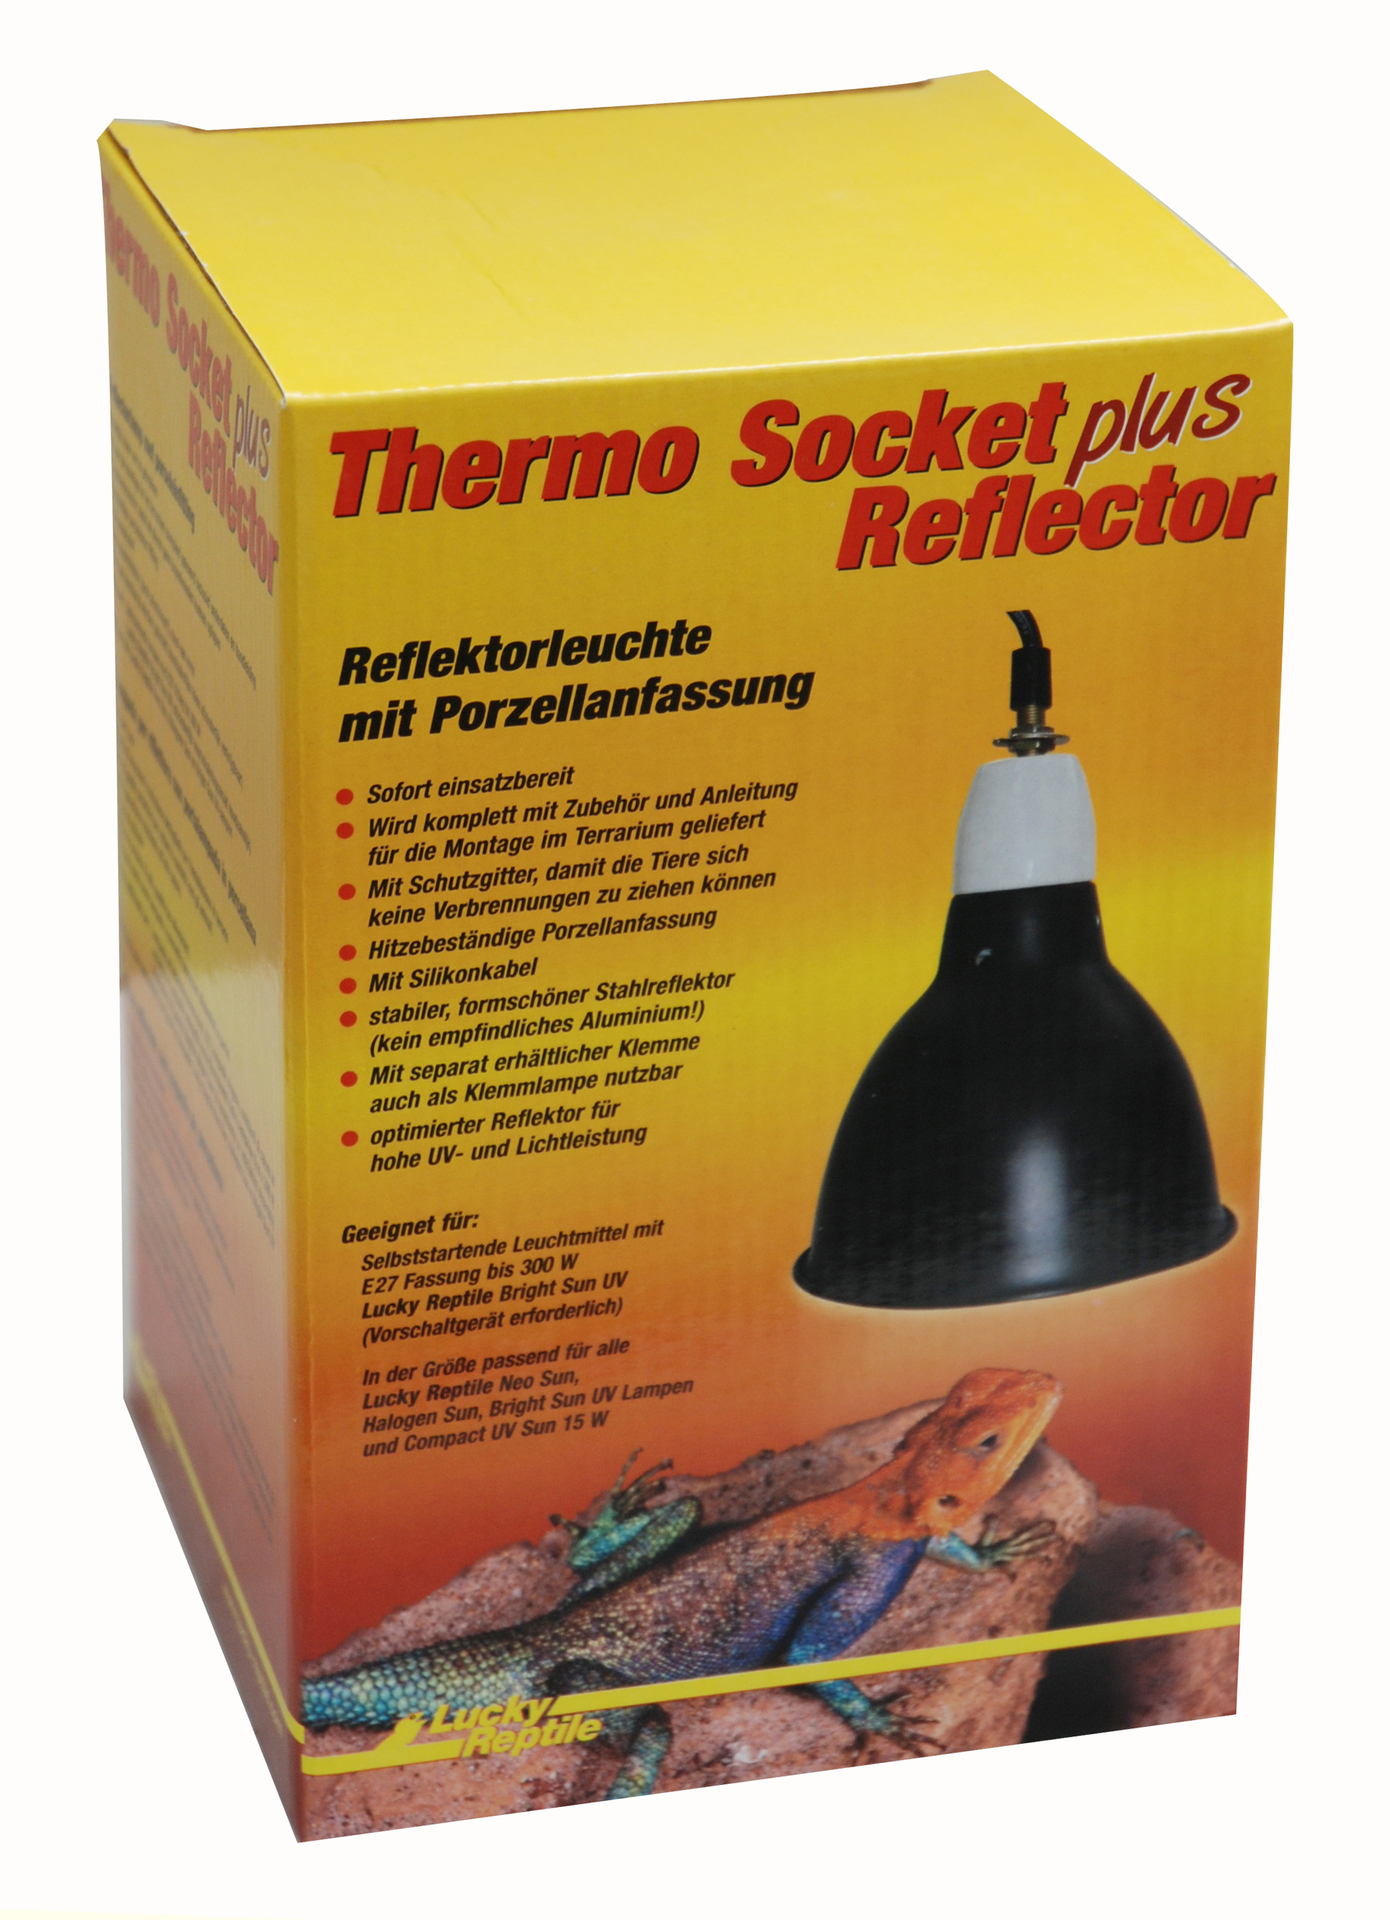 Import-Export Peter Hoch GmbH Thermo Socket mit Reflector